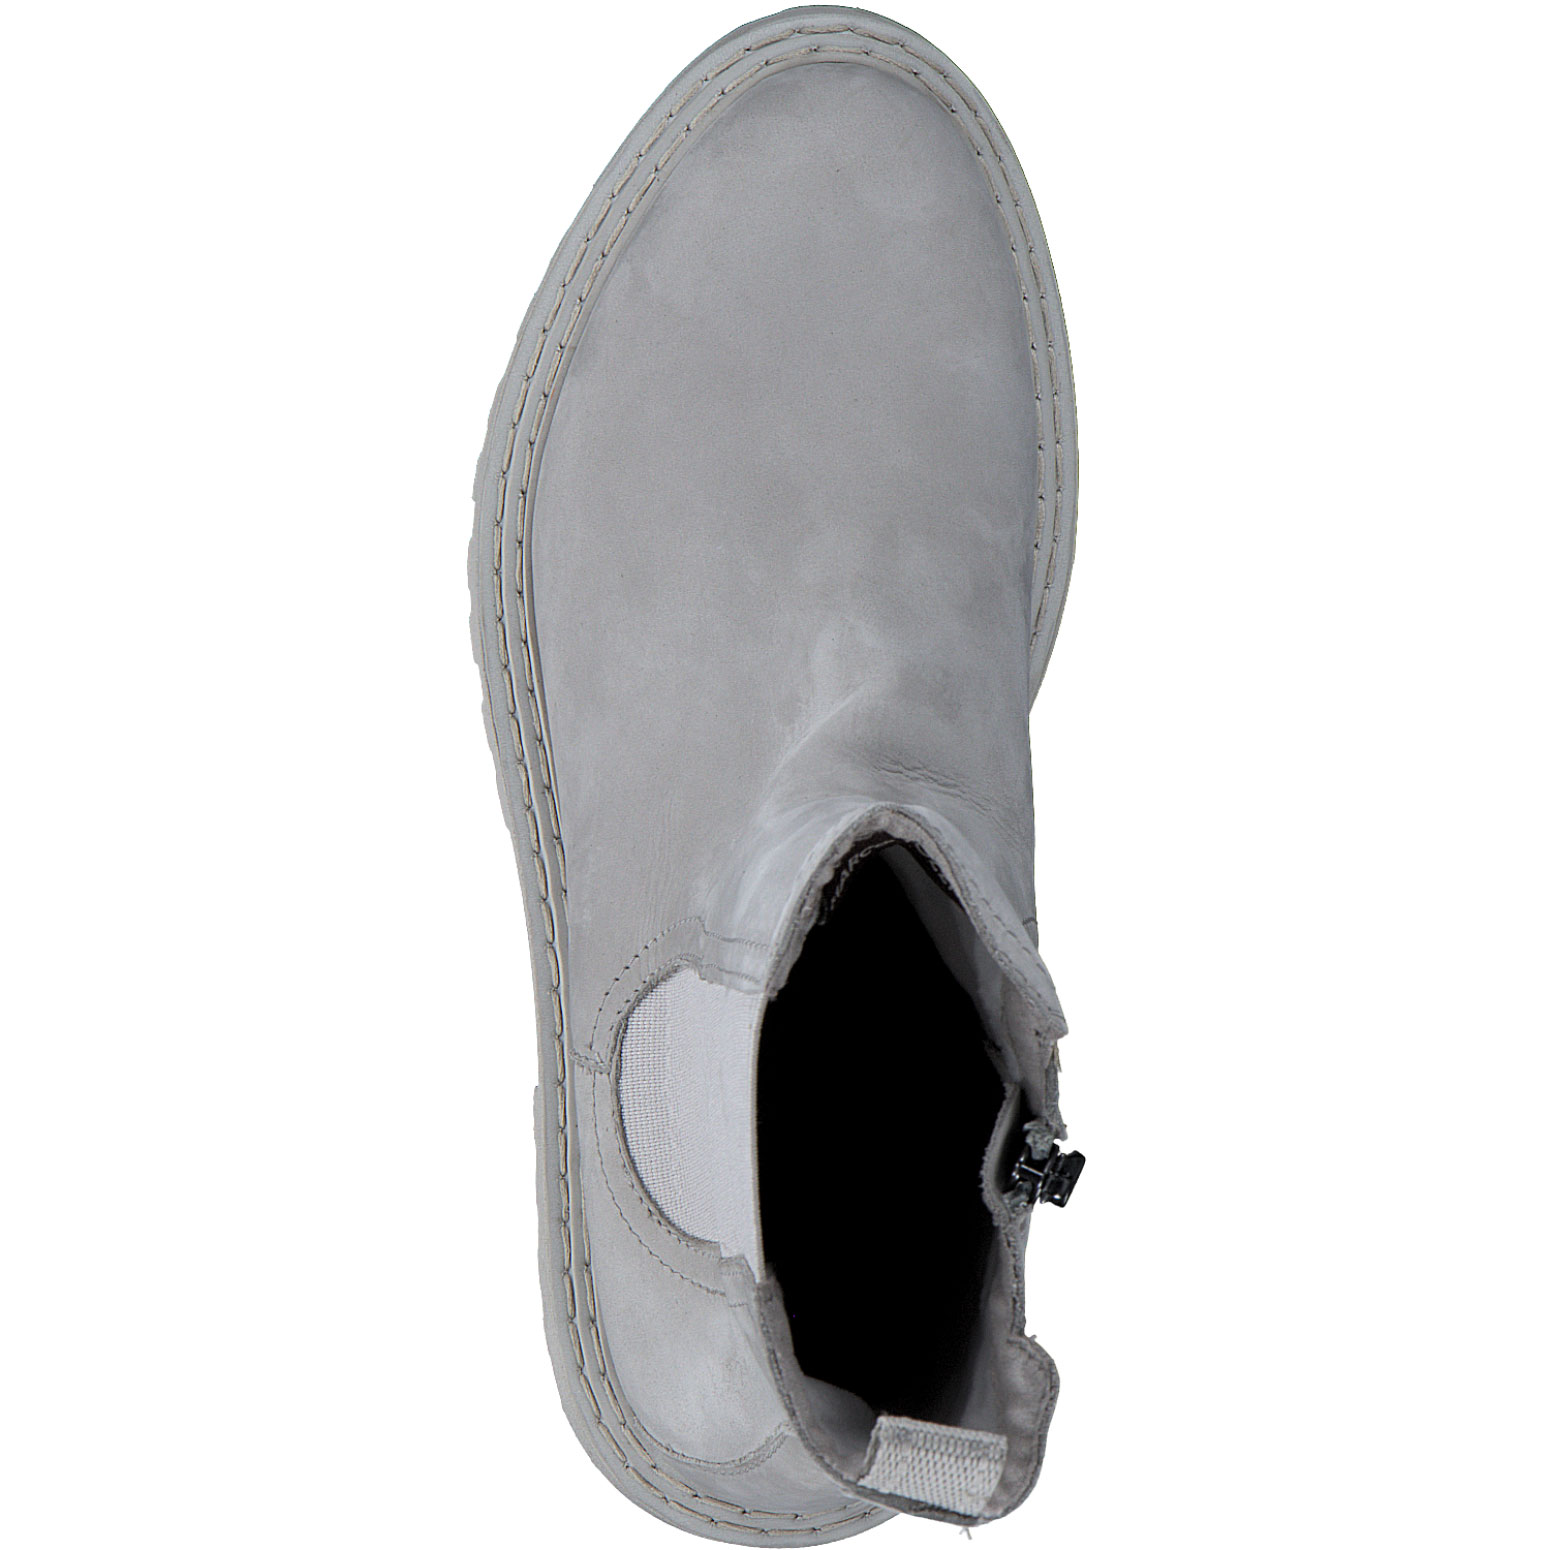 Chelsea Boot - Grey suede leather